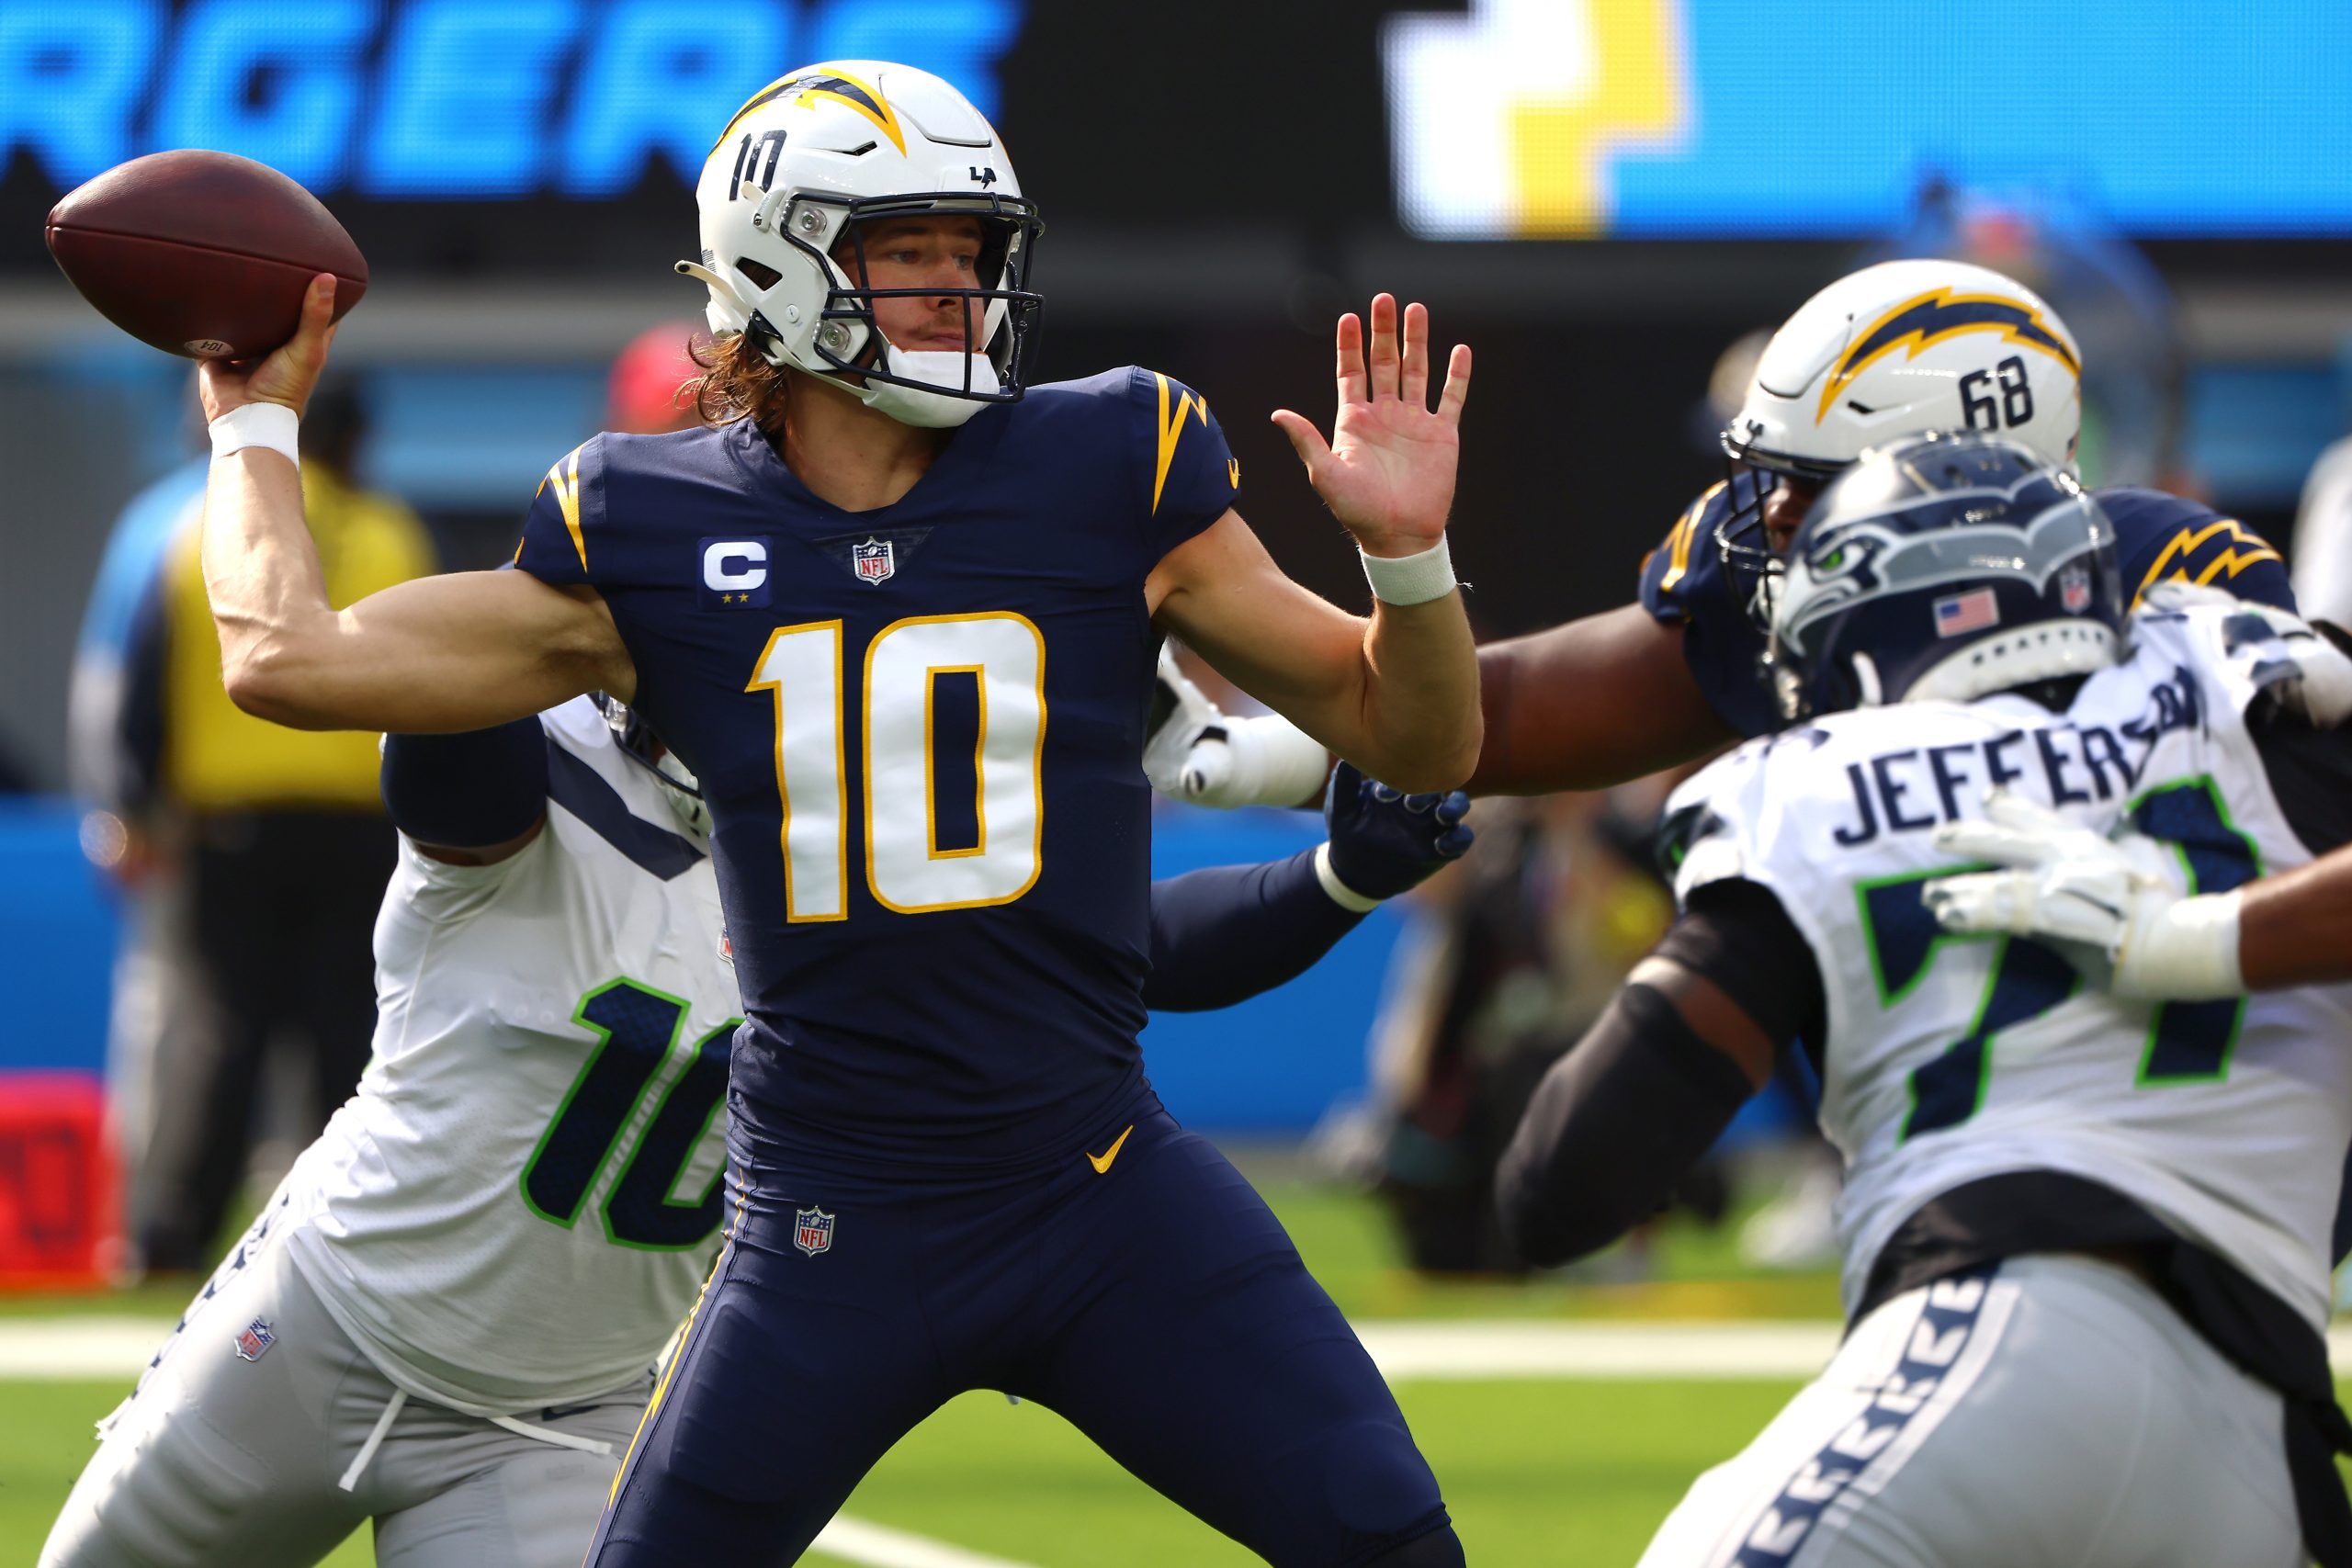 5 NFL Picks Against the Spread (ATS) for Week 9 